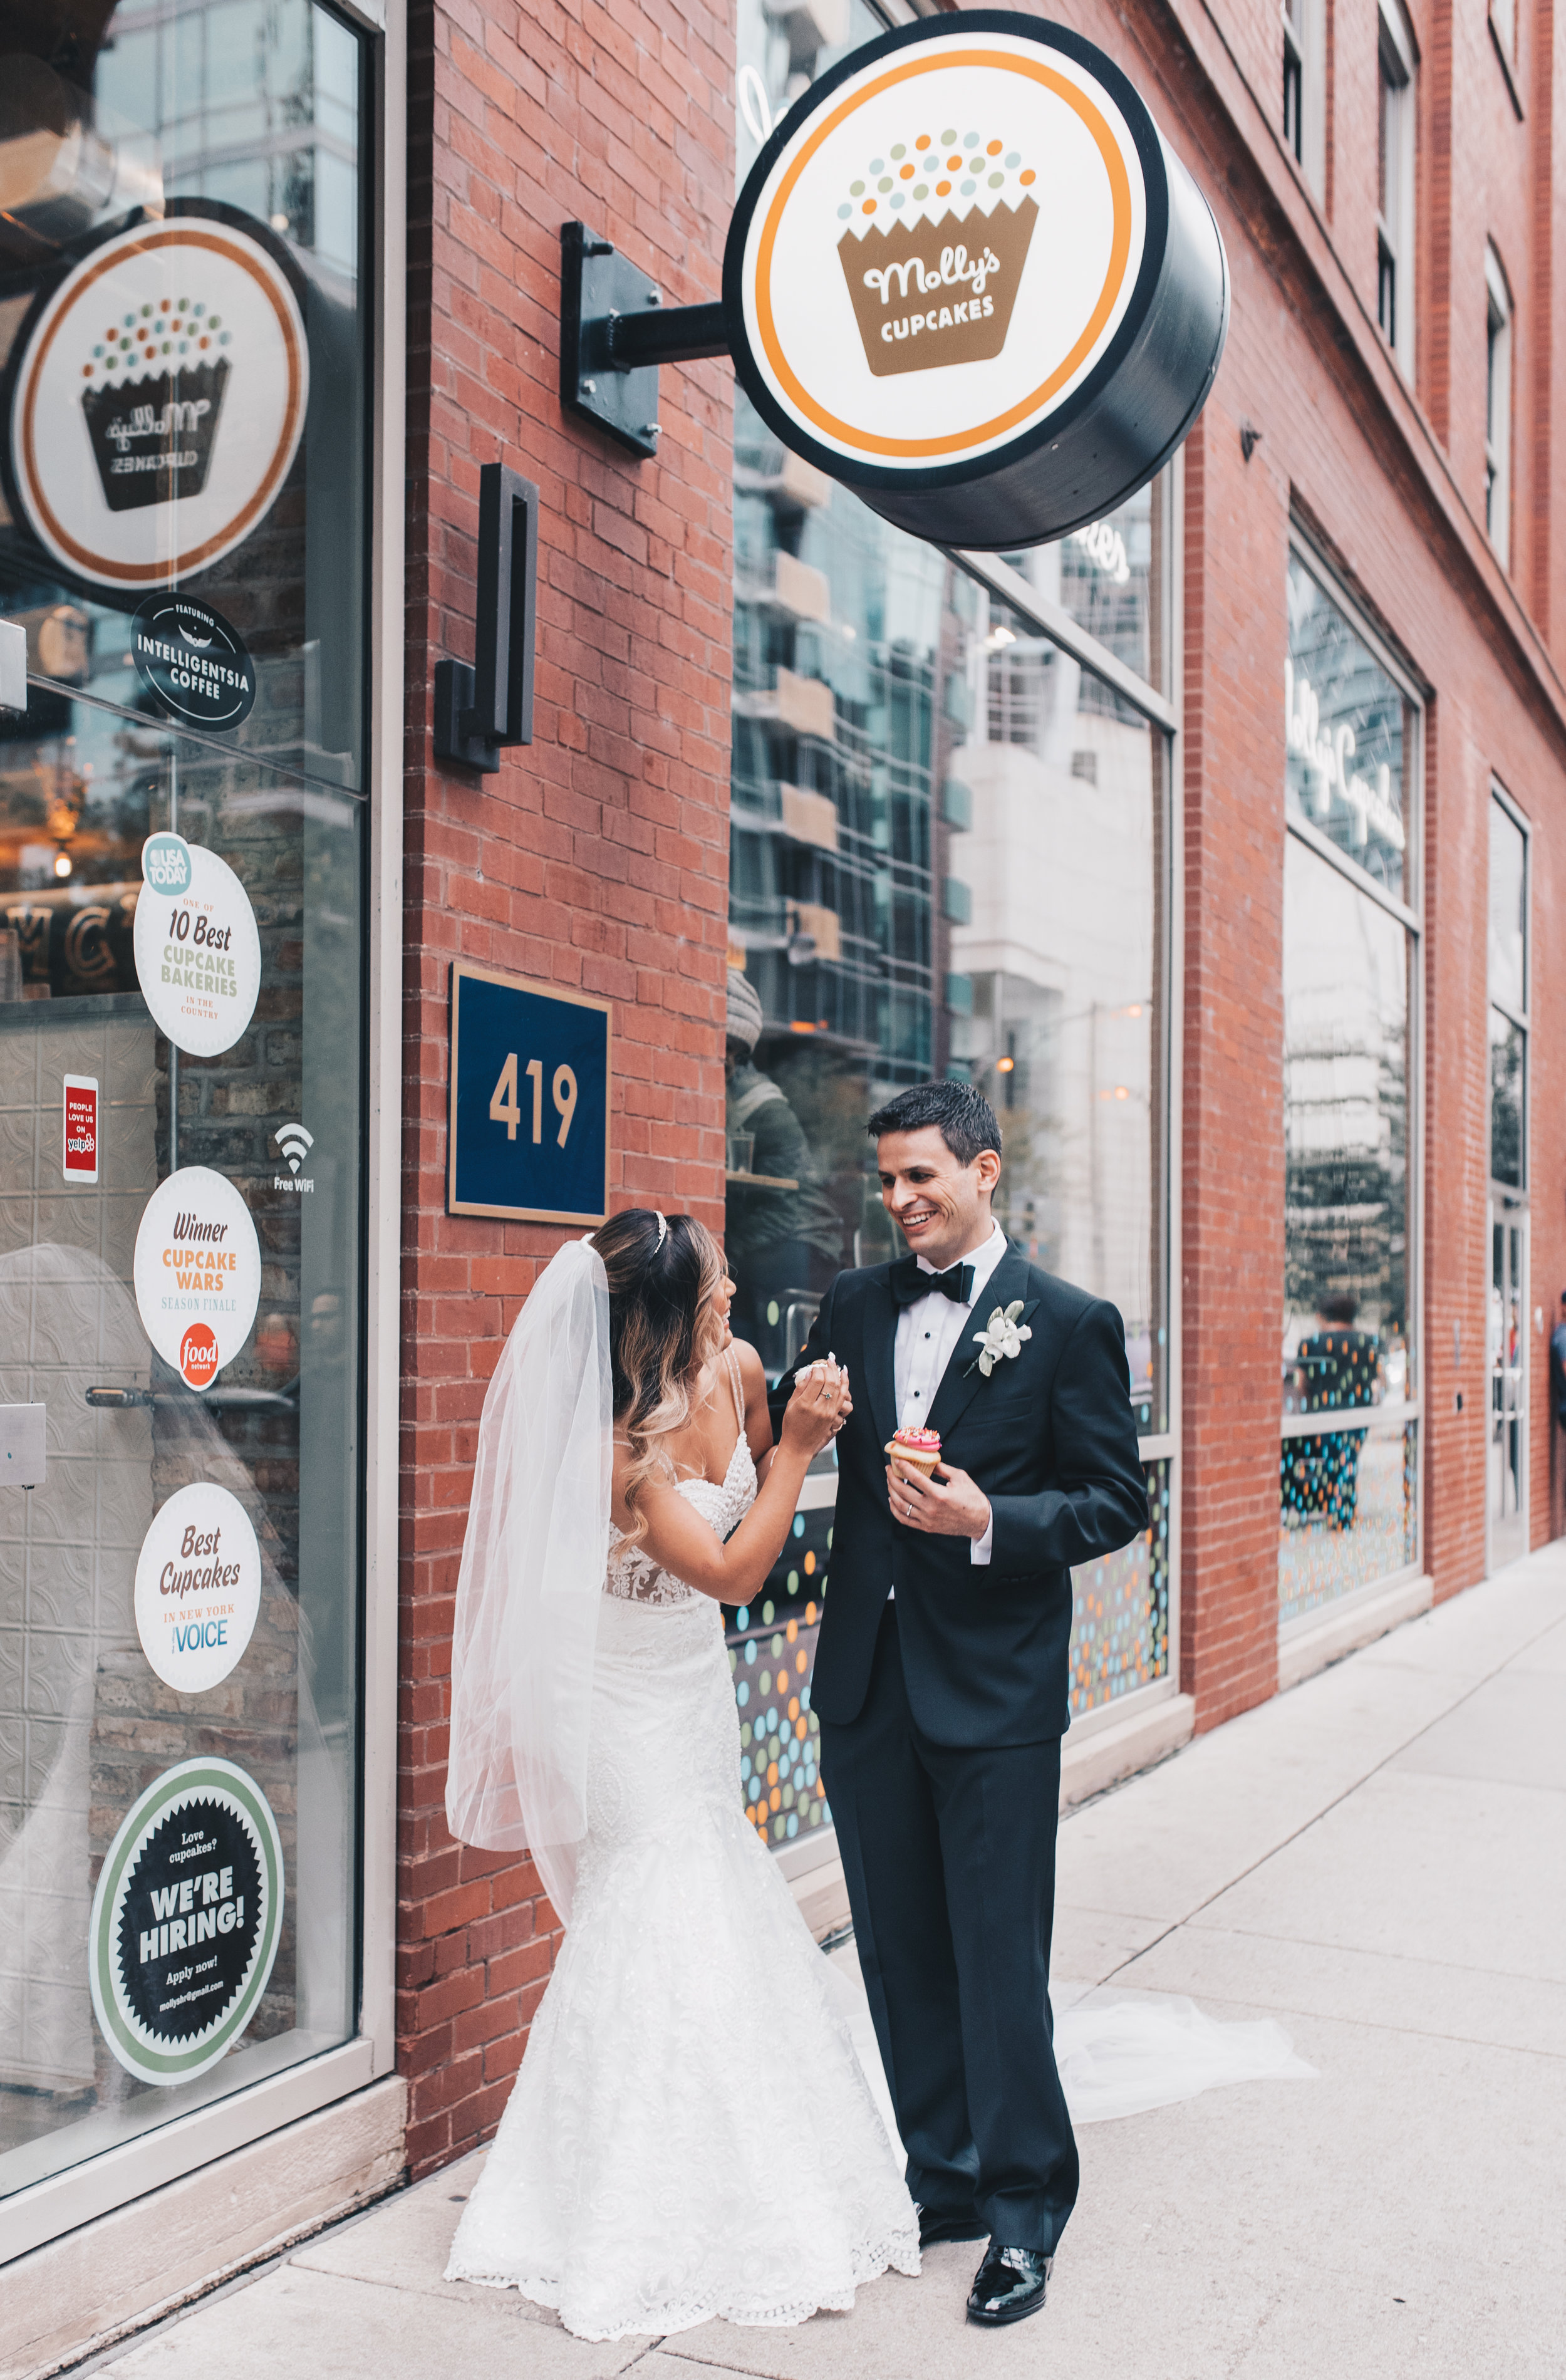 Chicago Bride and Groom Photos, Chicago Wedding, Chicago Wedding Photographer, Chicago Elopement Photographer, Chicago Bride and Groom Photos, Bride and Groom Photos